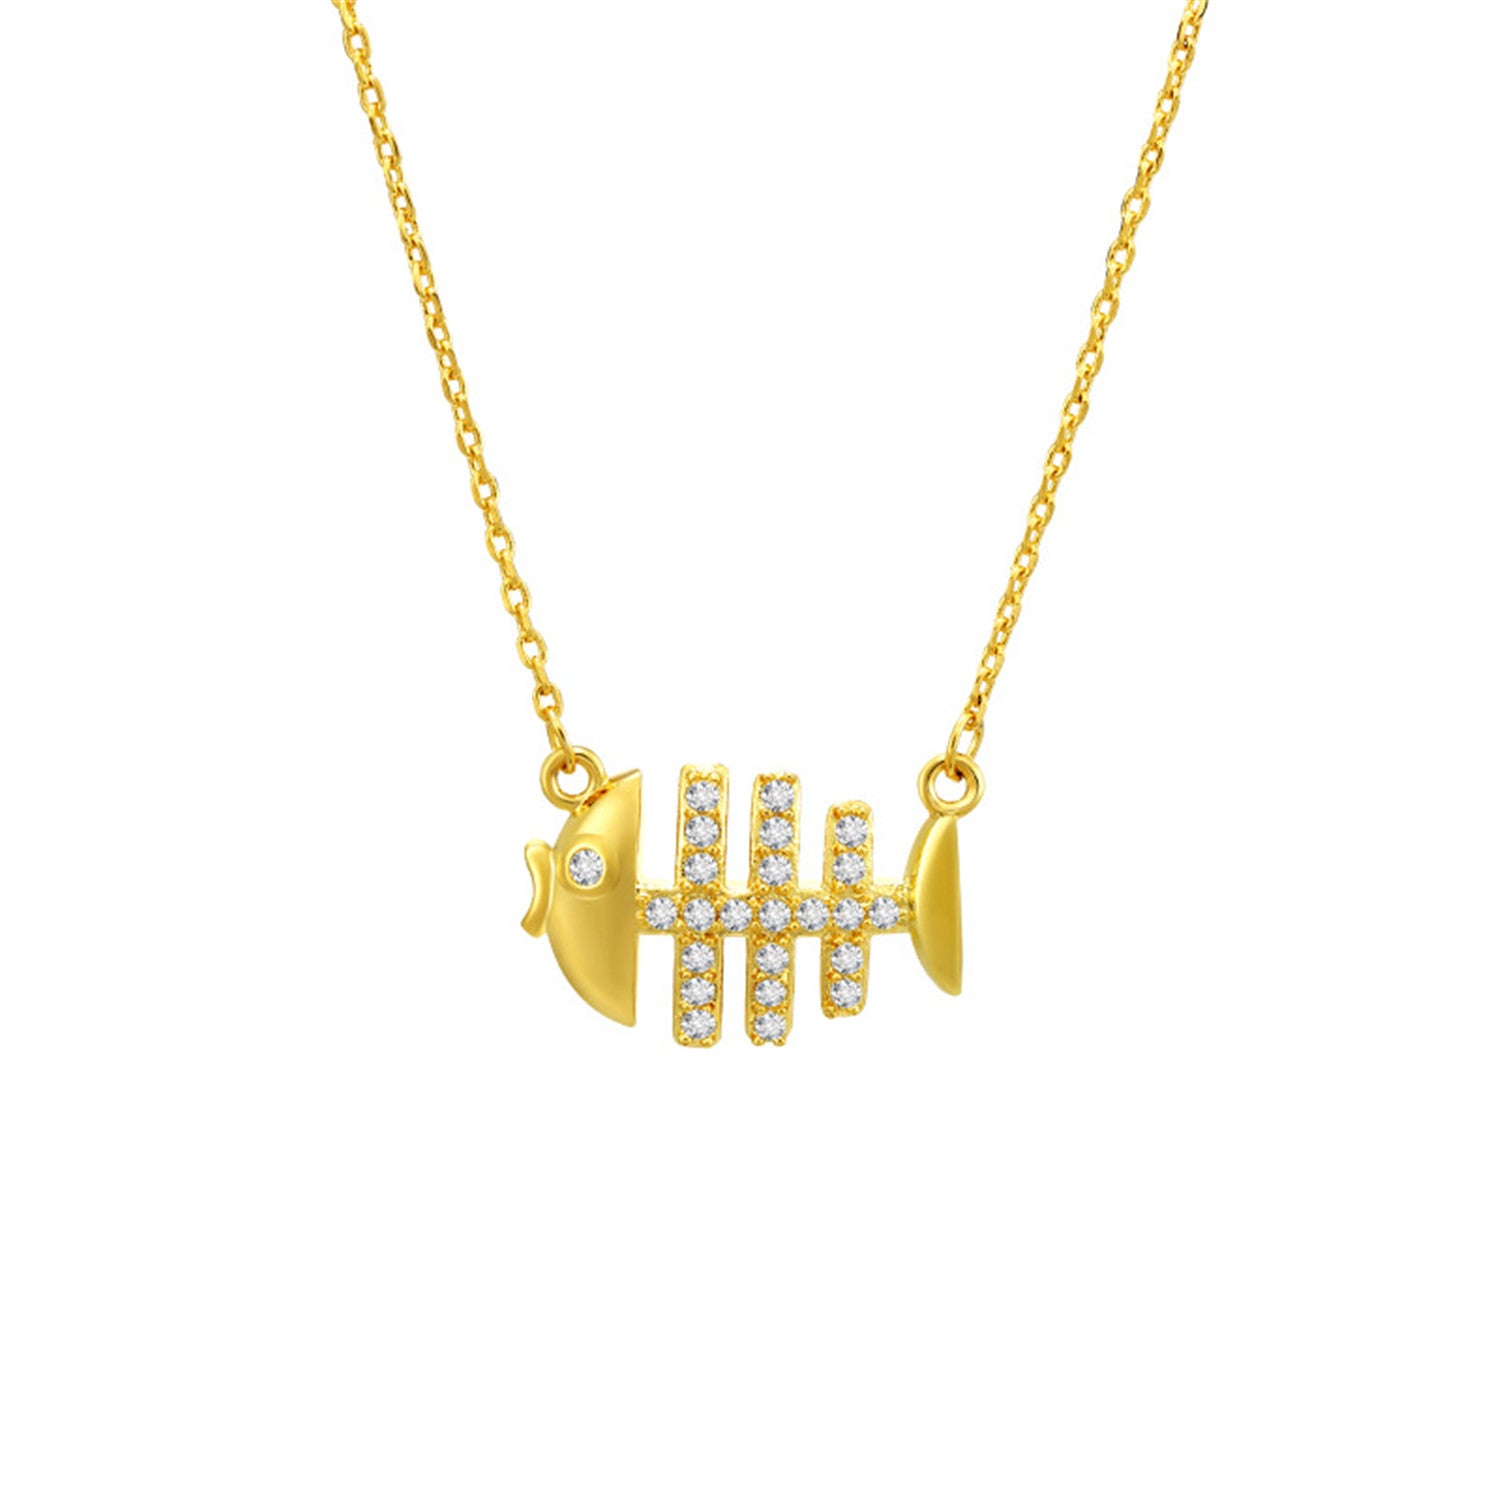 Fishbone Pendant,24K Gold Plated,With Cubic Zirconia